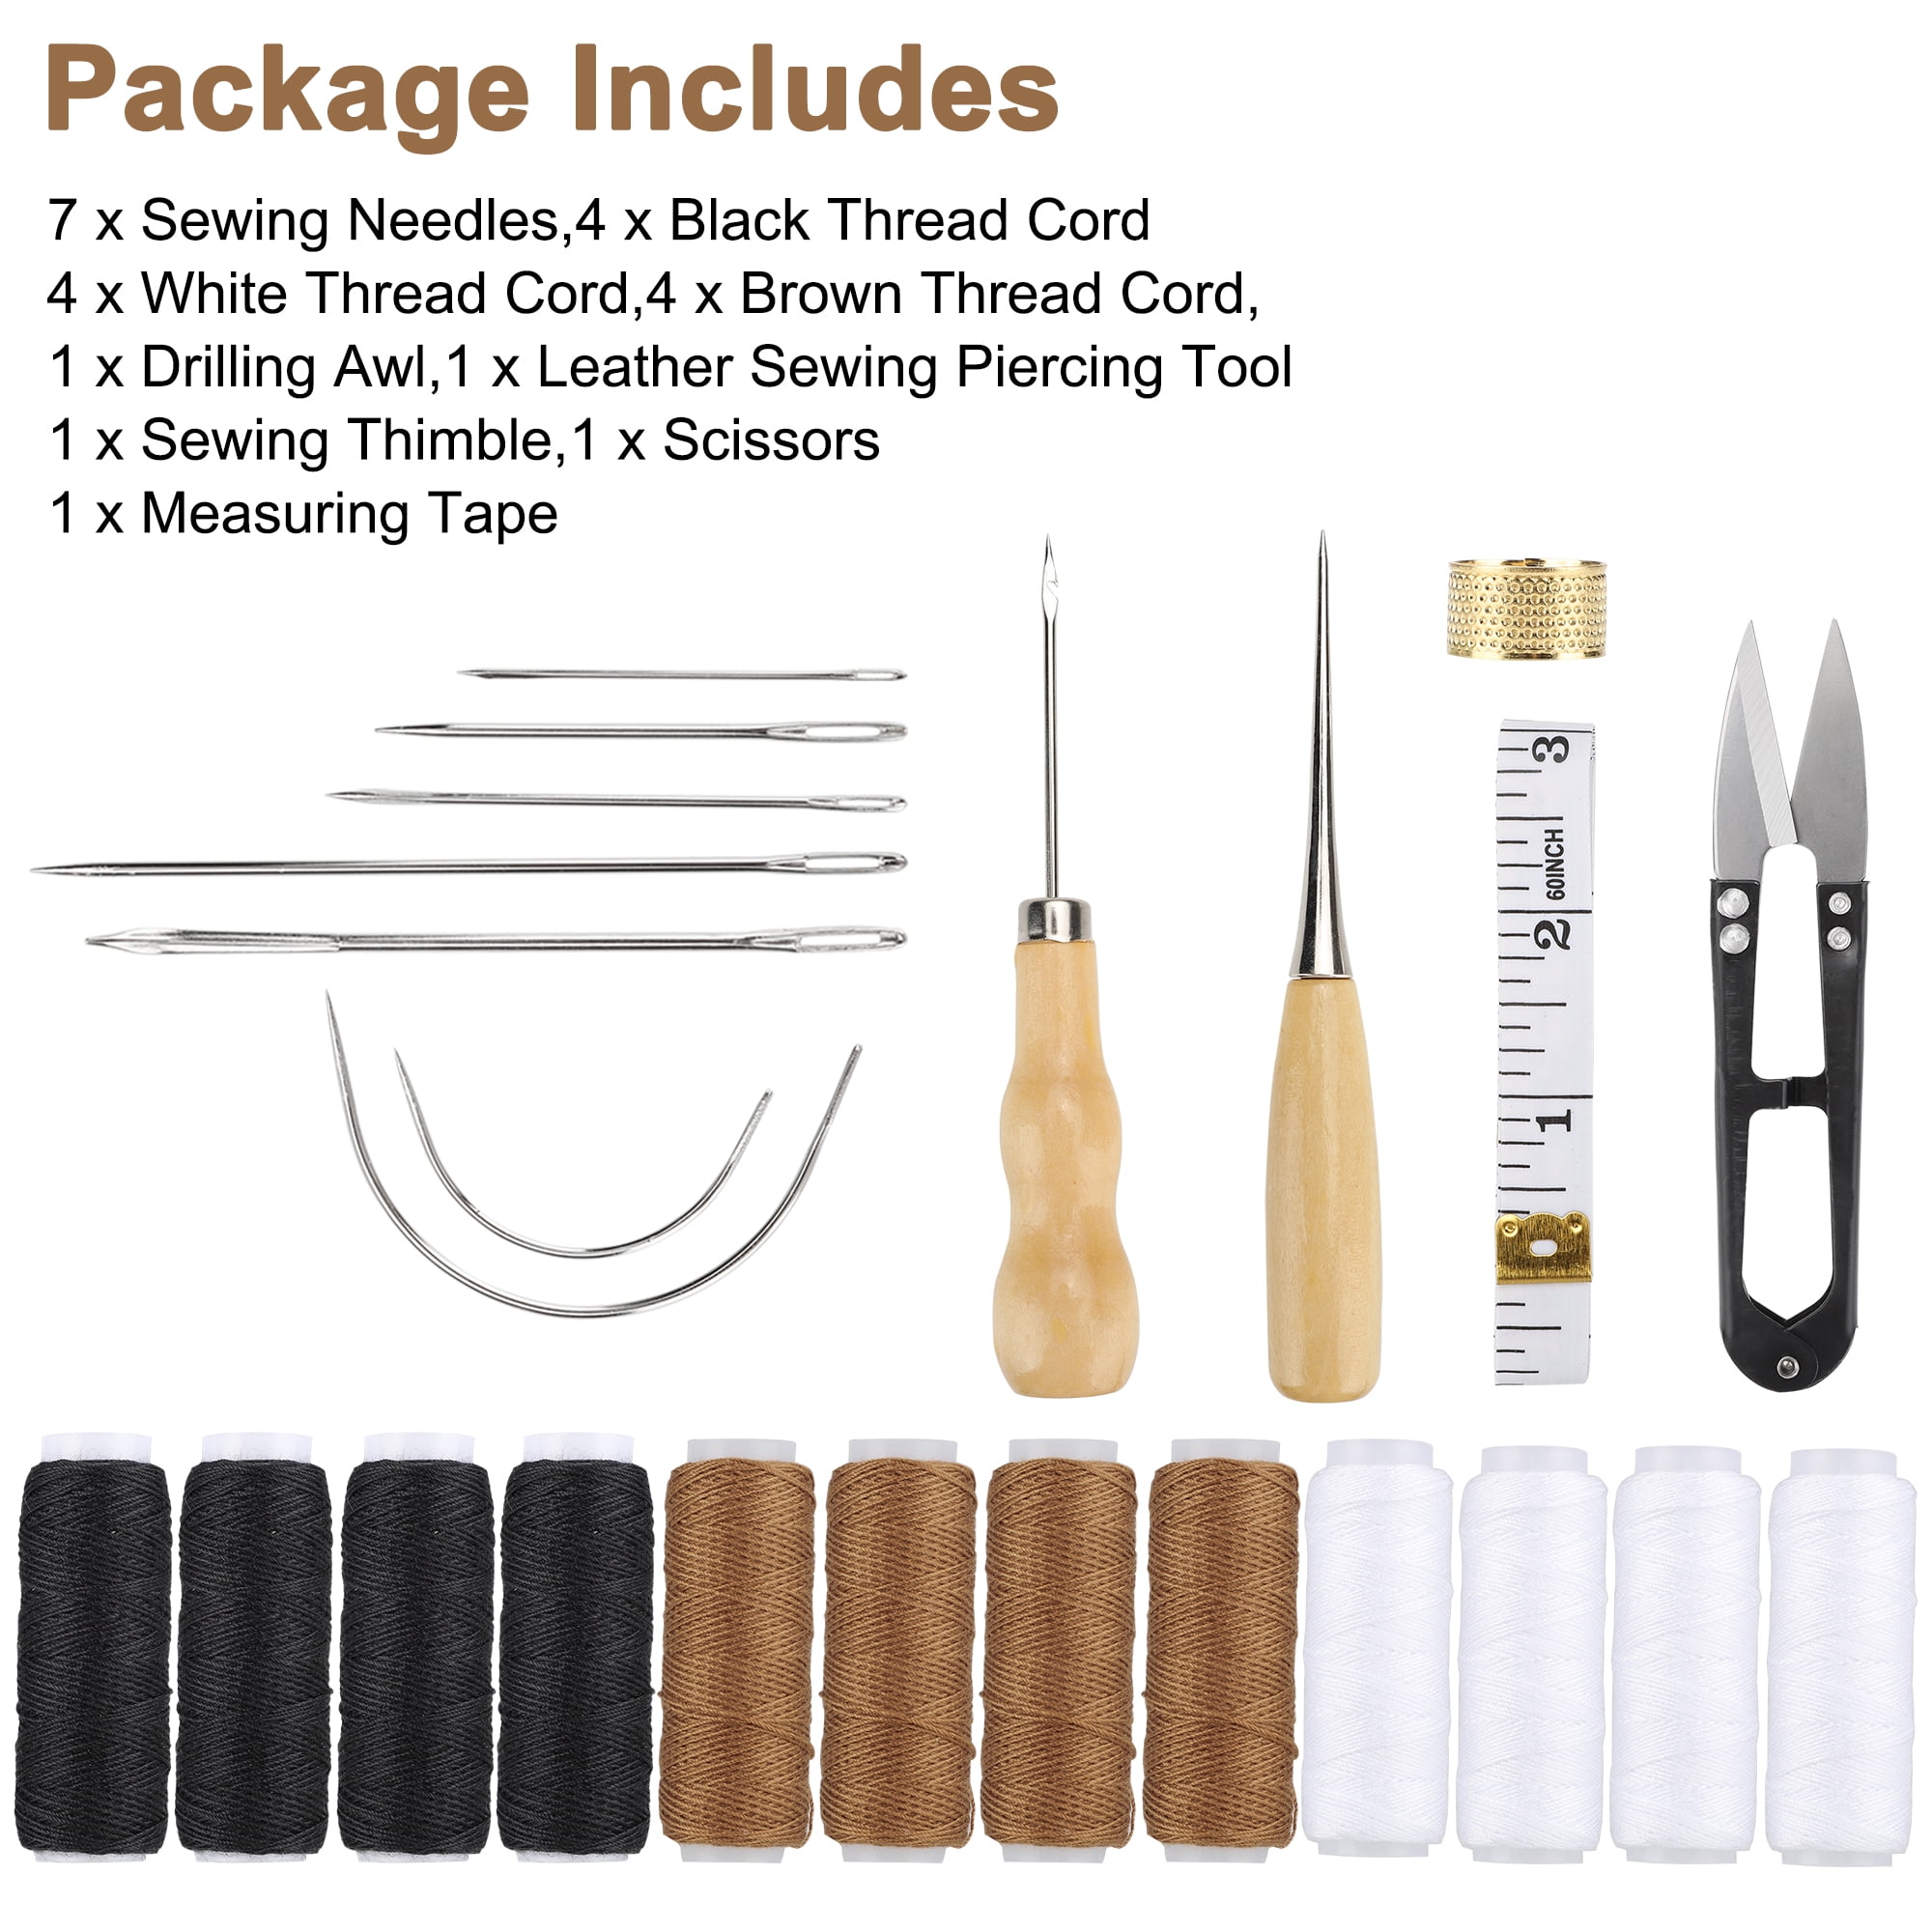 AIEX 29Pcs Upholstery Repair Kit Leather Hand Sewing Needles Craft Tools  with Upholstery Needles, Thread,Tape Measure, Drilling Awls for Leather